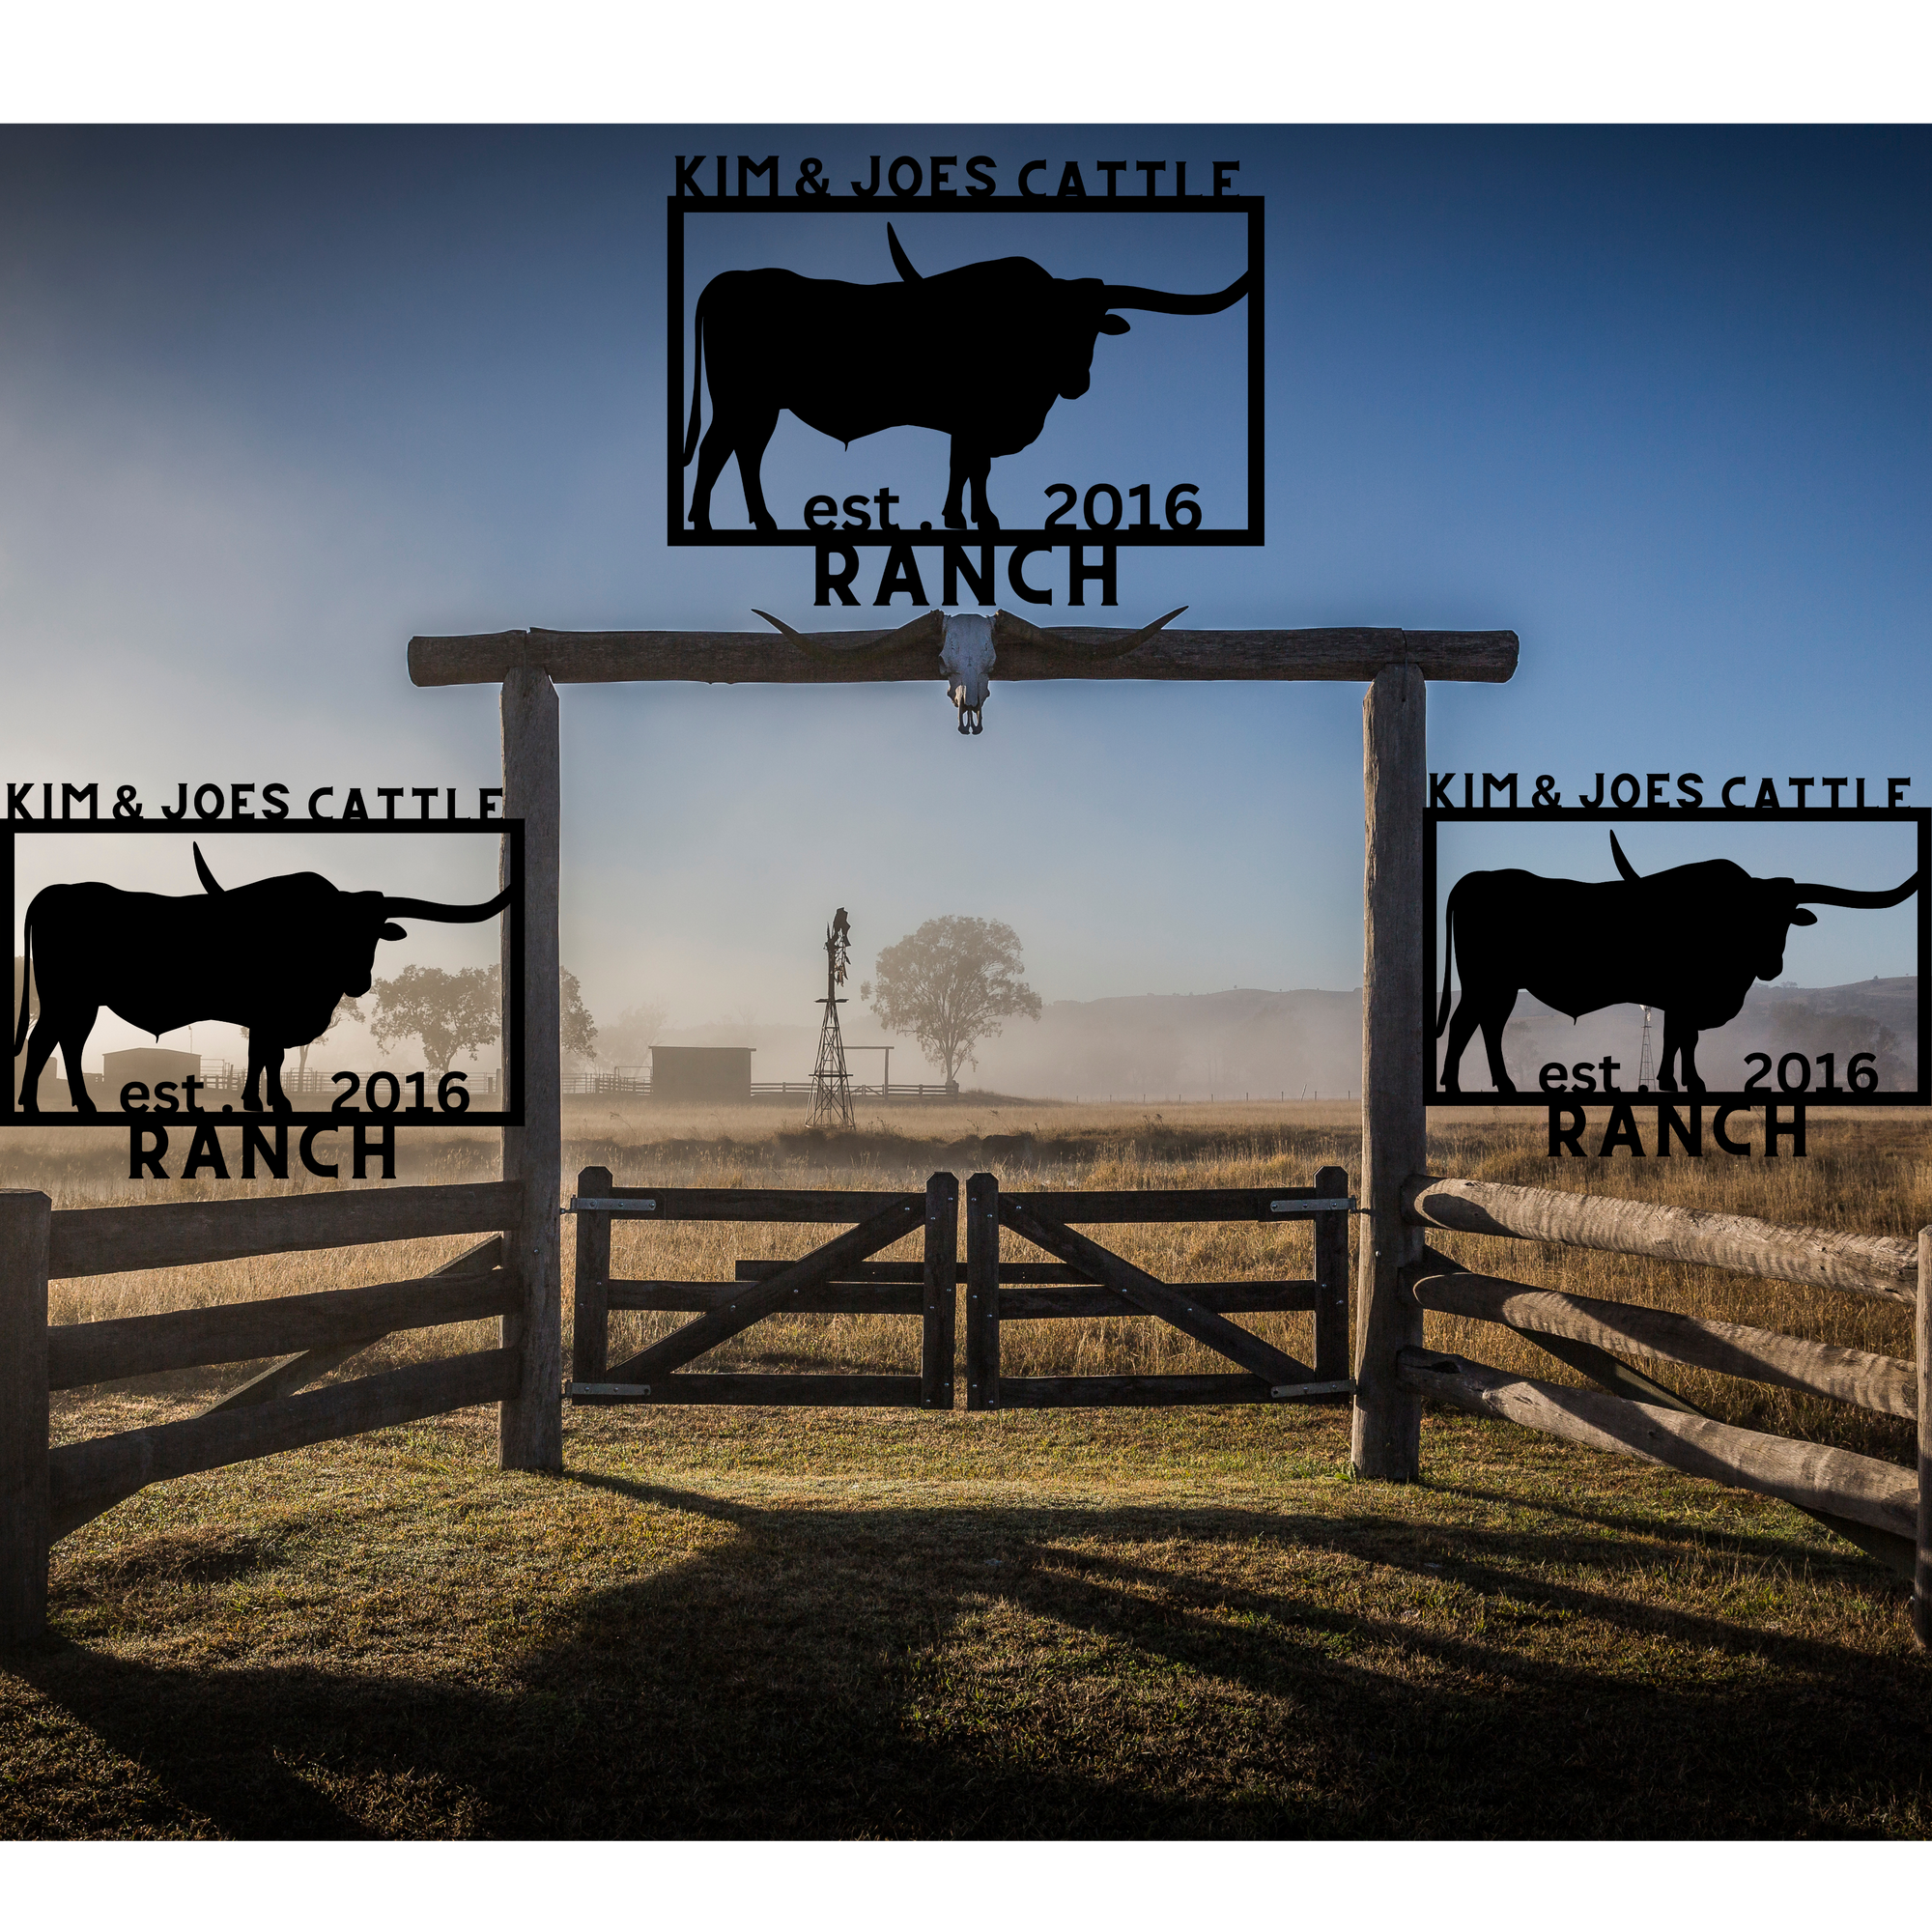 Farmers' and Ranchers' personalized Metal Art